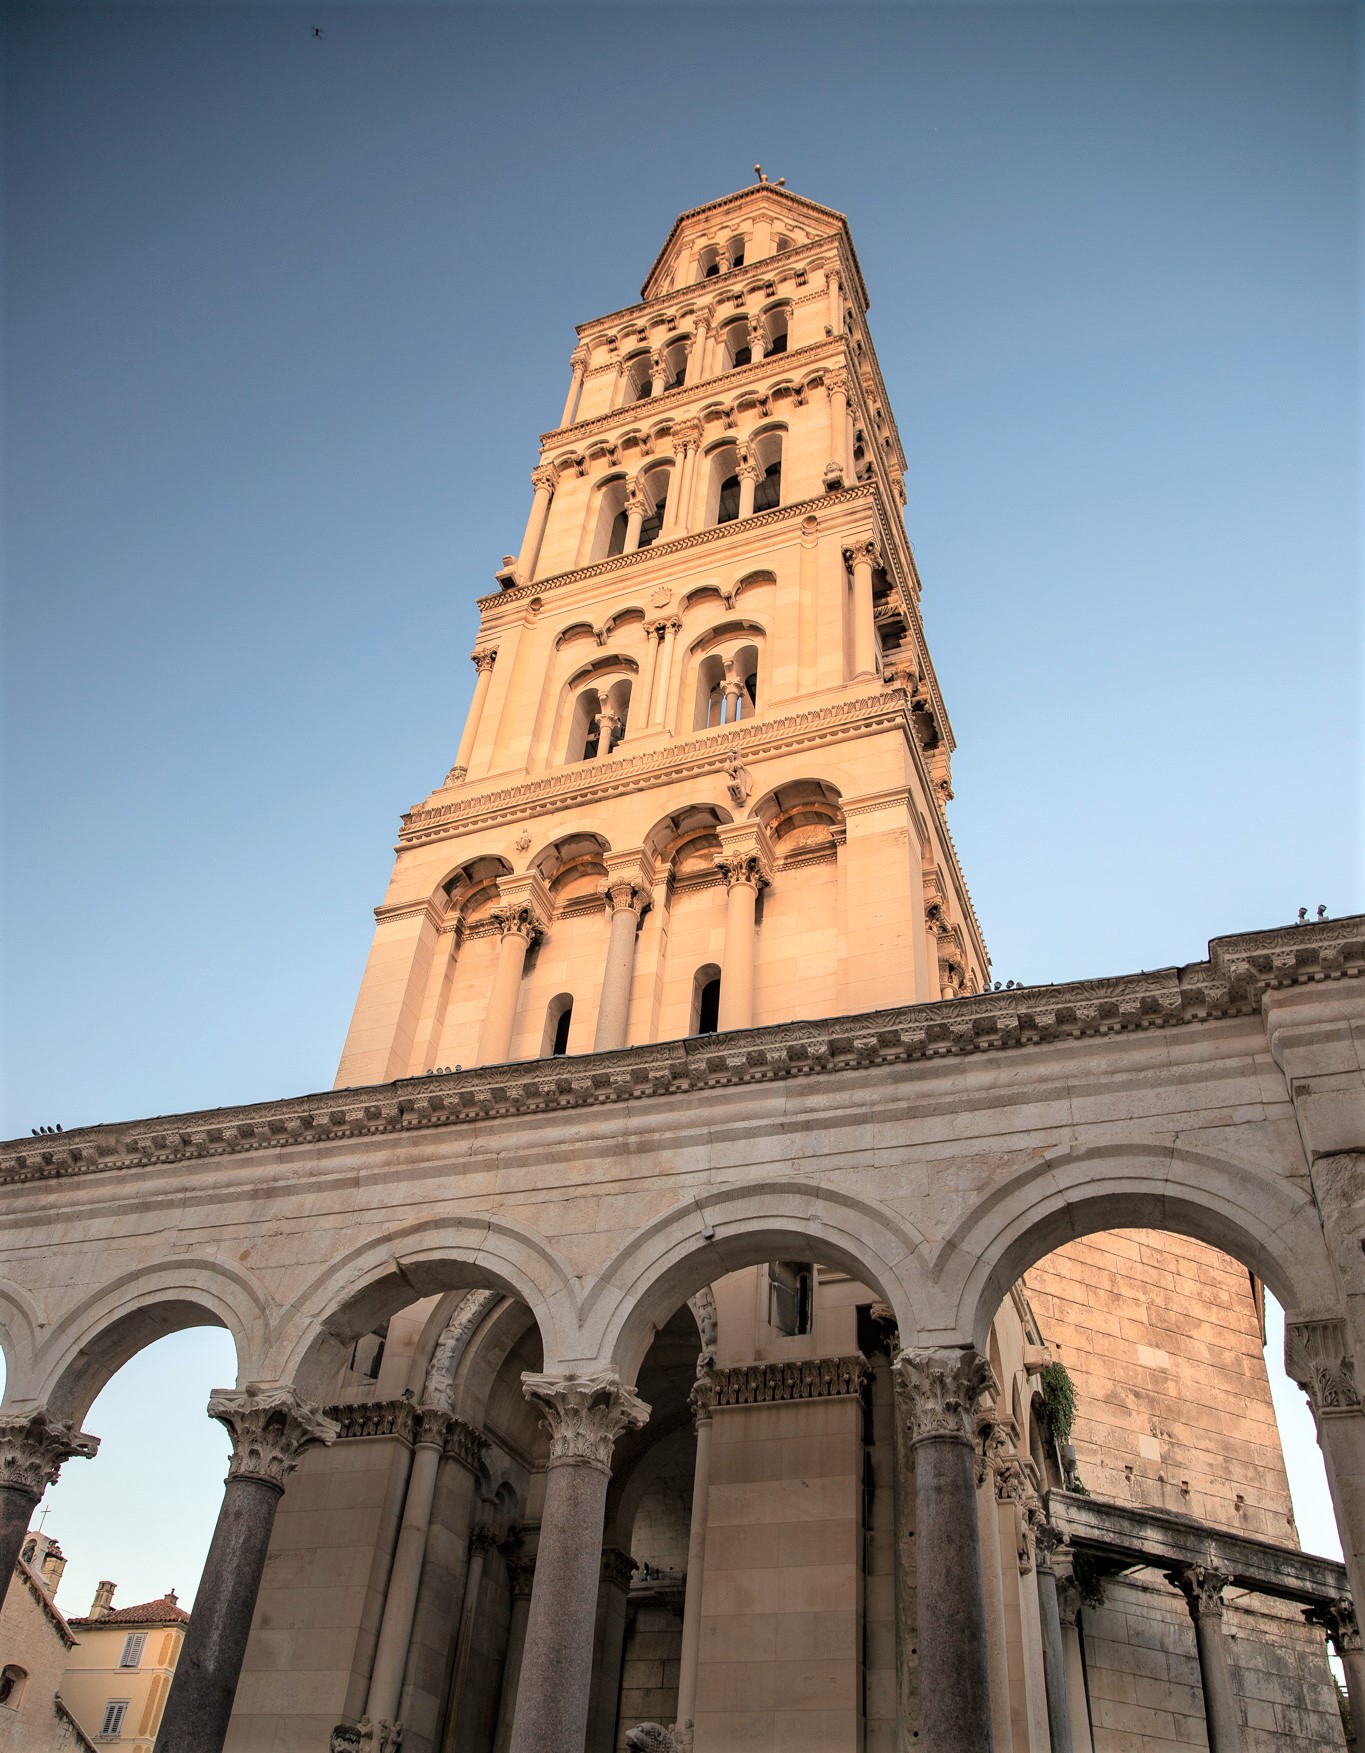 Top 5 Things To Do In Split, Croatia: The Bell Tower Of Saint Domnius Cathedral